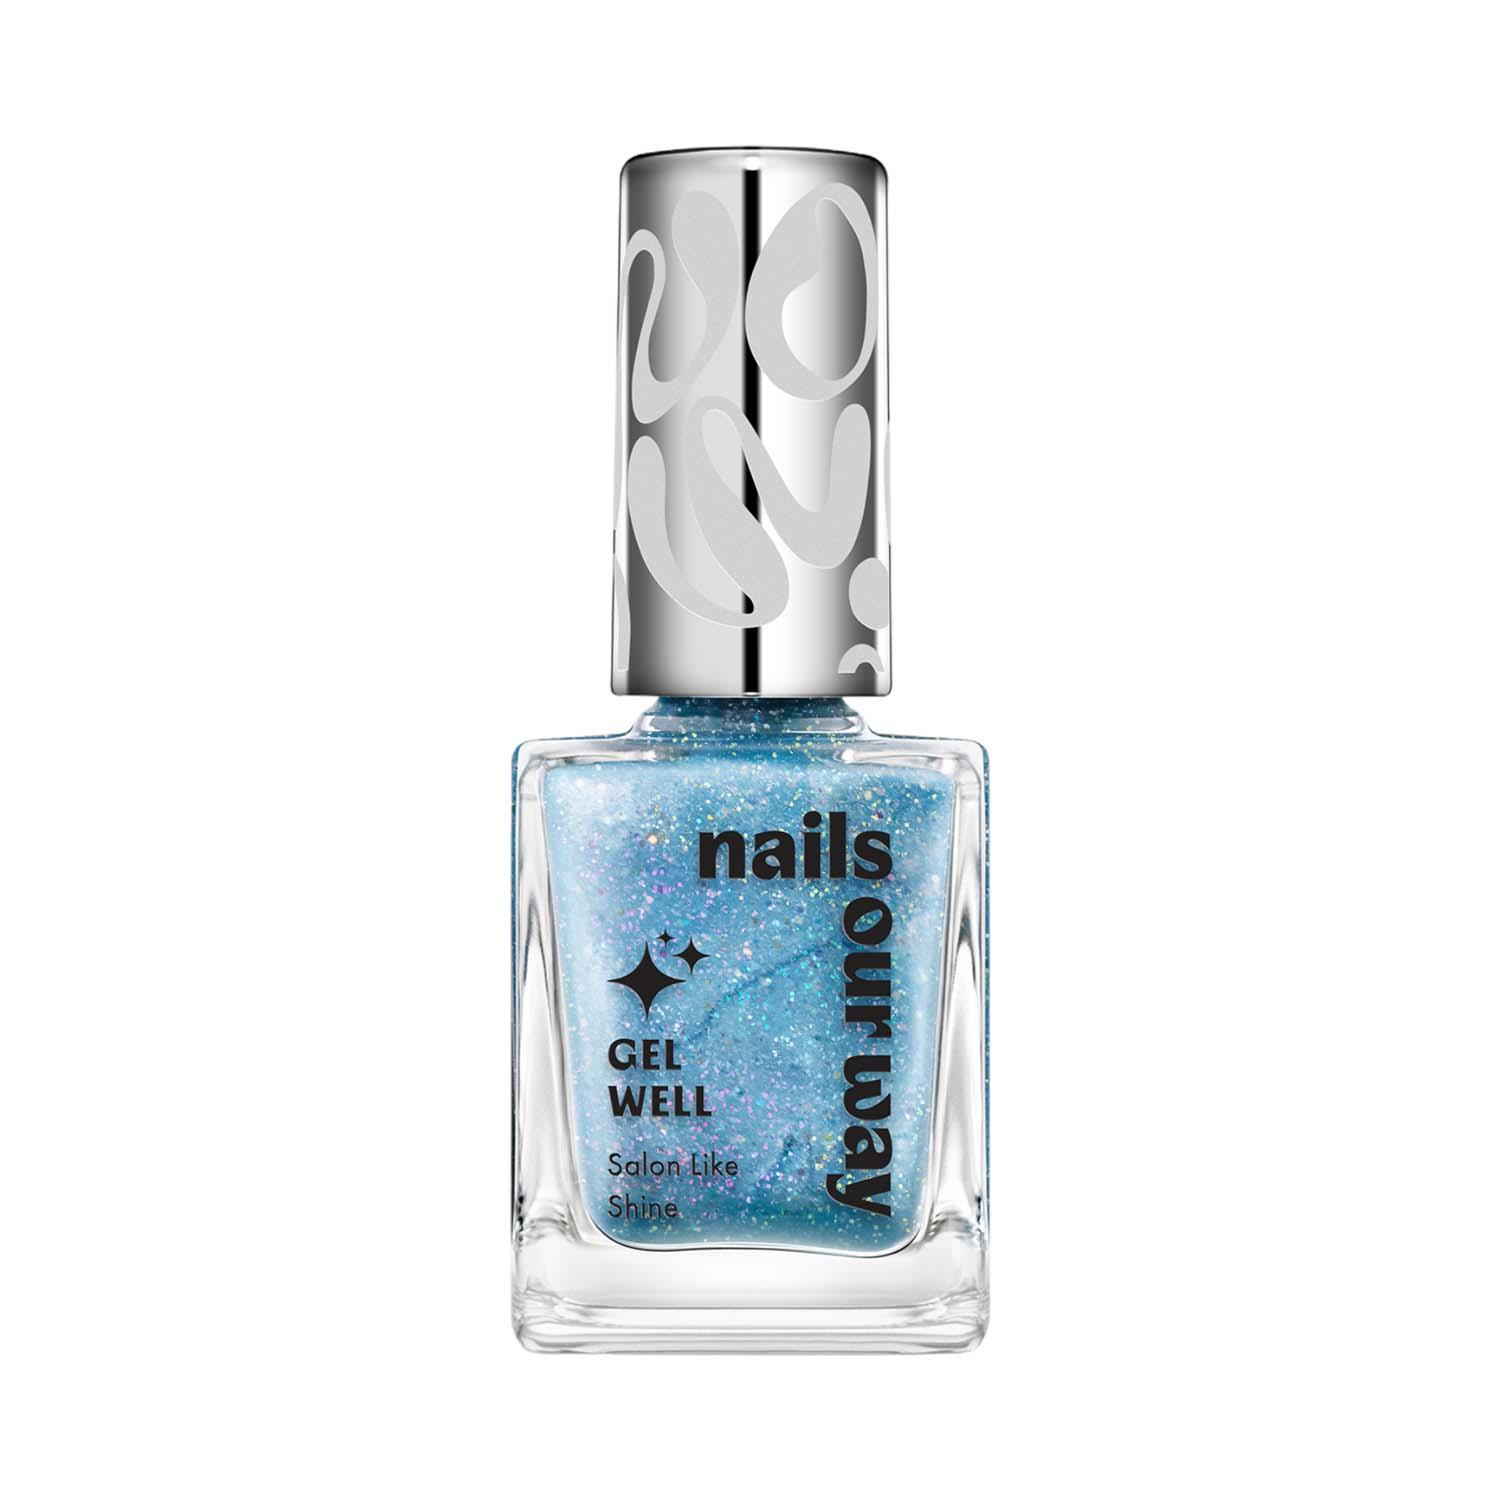 Nails Our Way | Nails Our Way Gel Well Nail Enamel - 402 Frisky (10 ml)